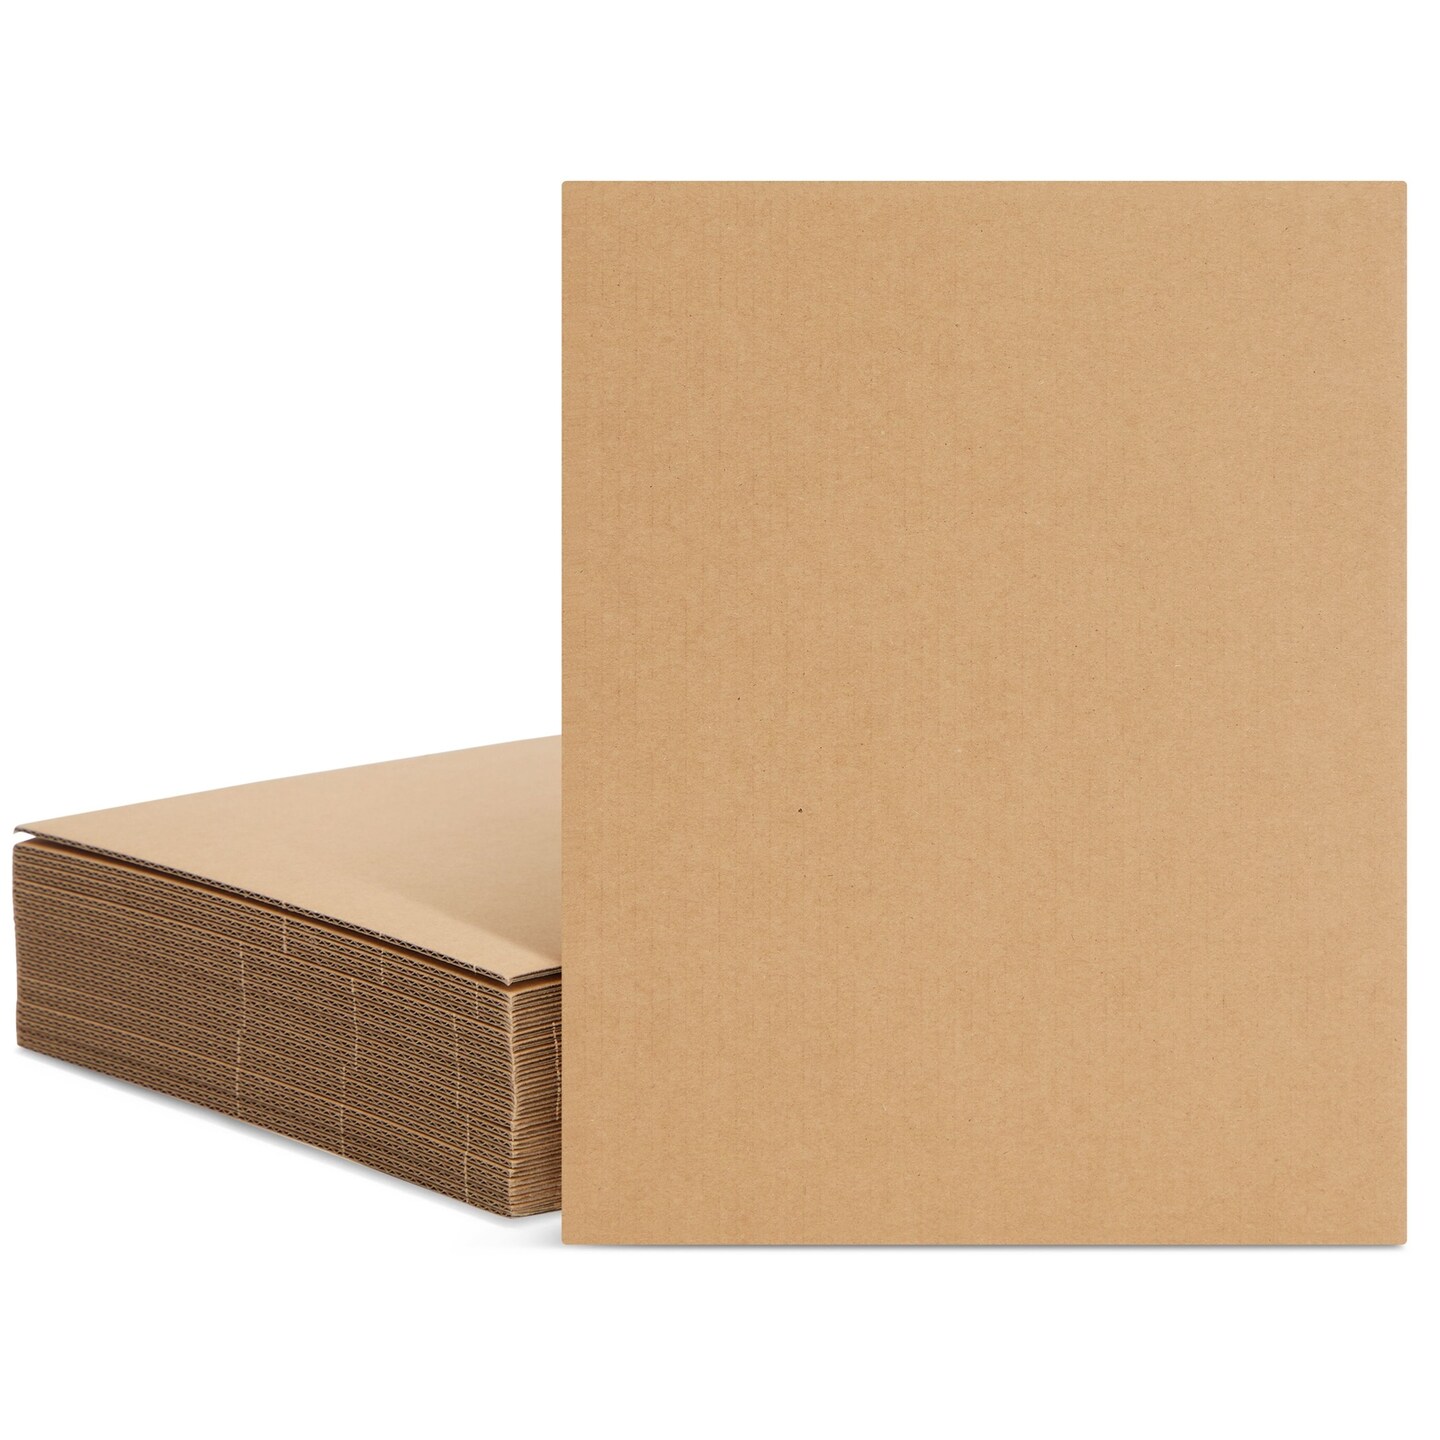 Thin Sheets Cardboard Packaging Lie On Stock Photo 1542782111